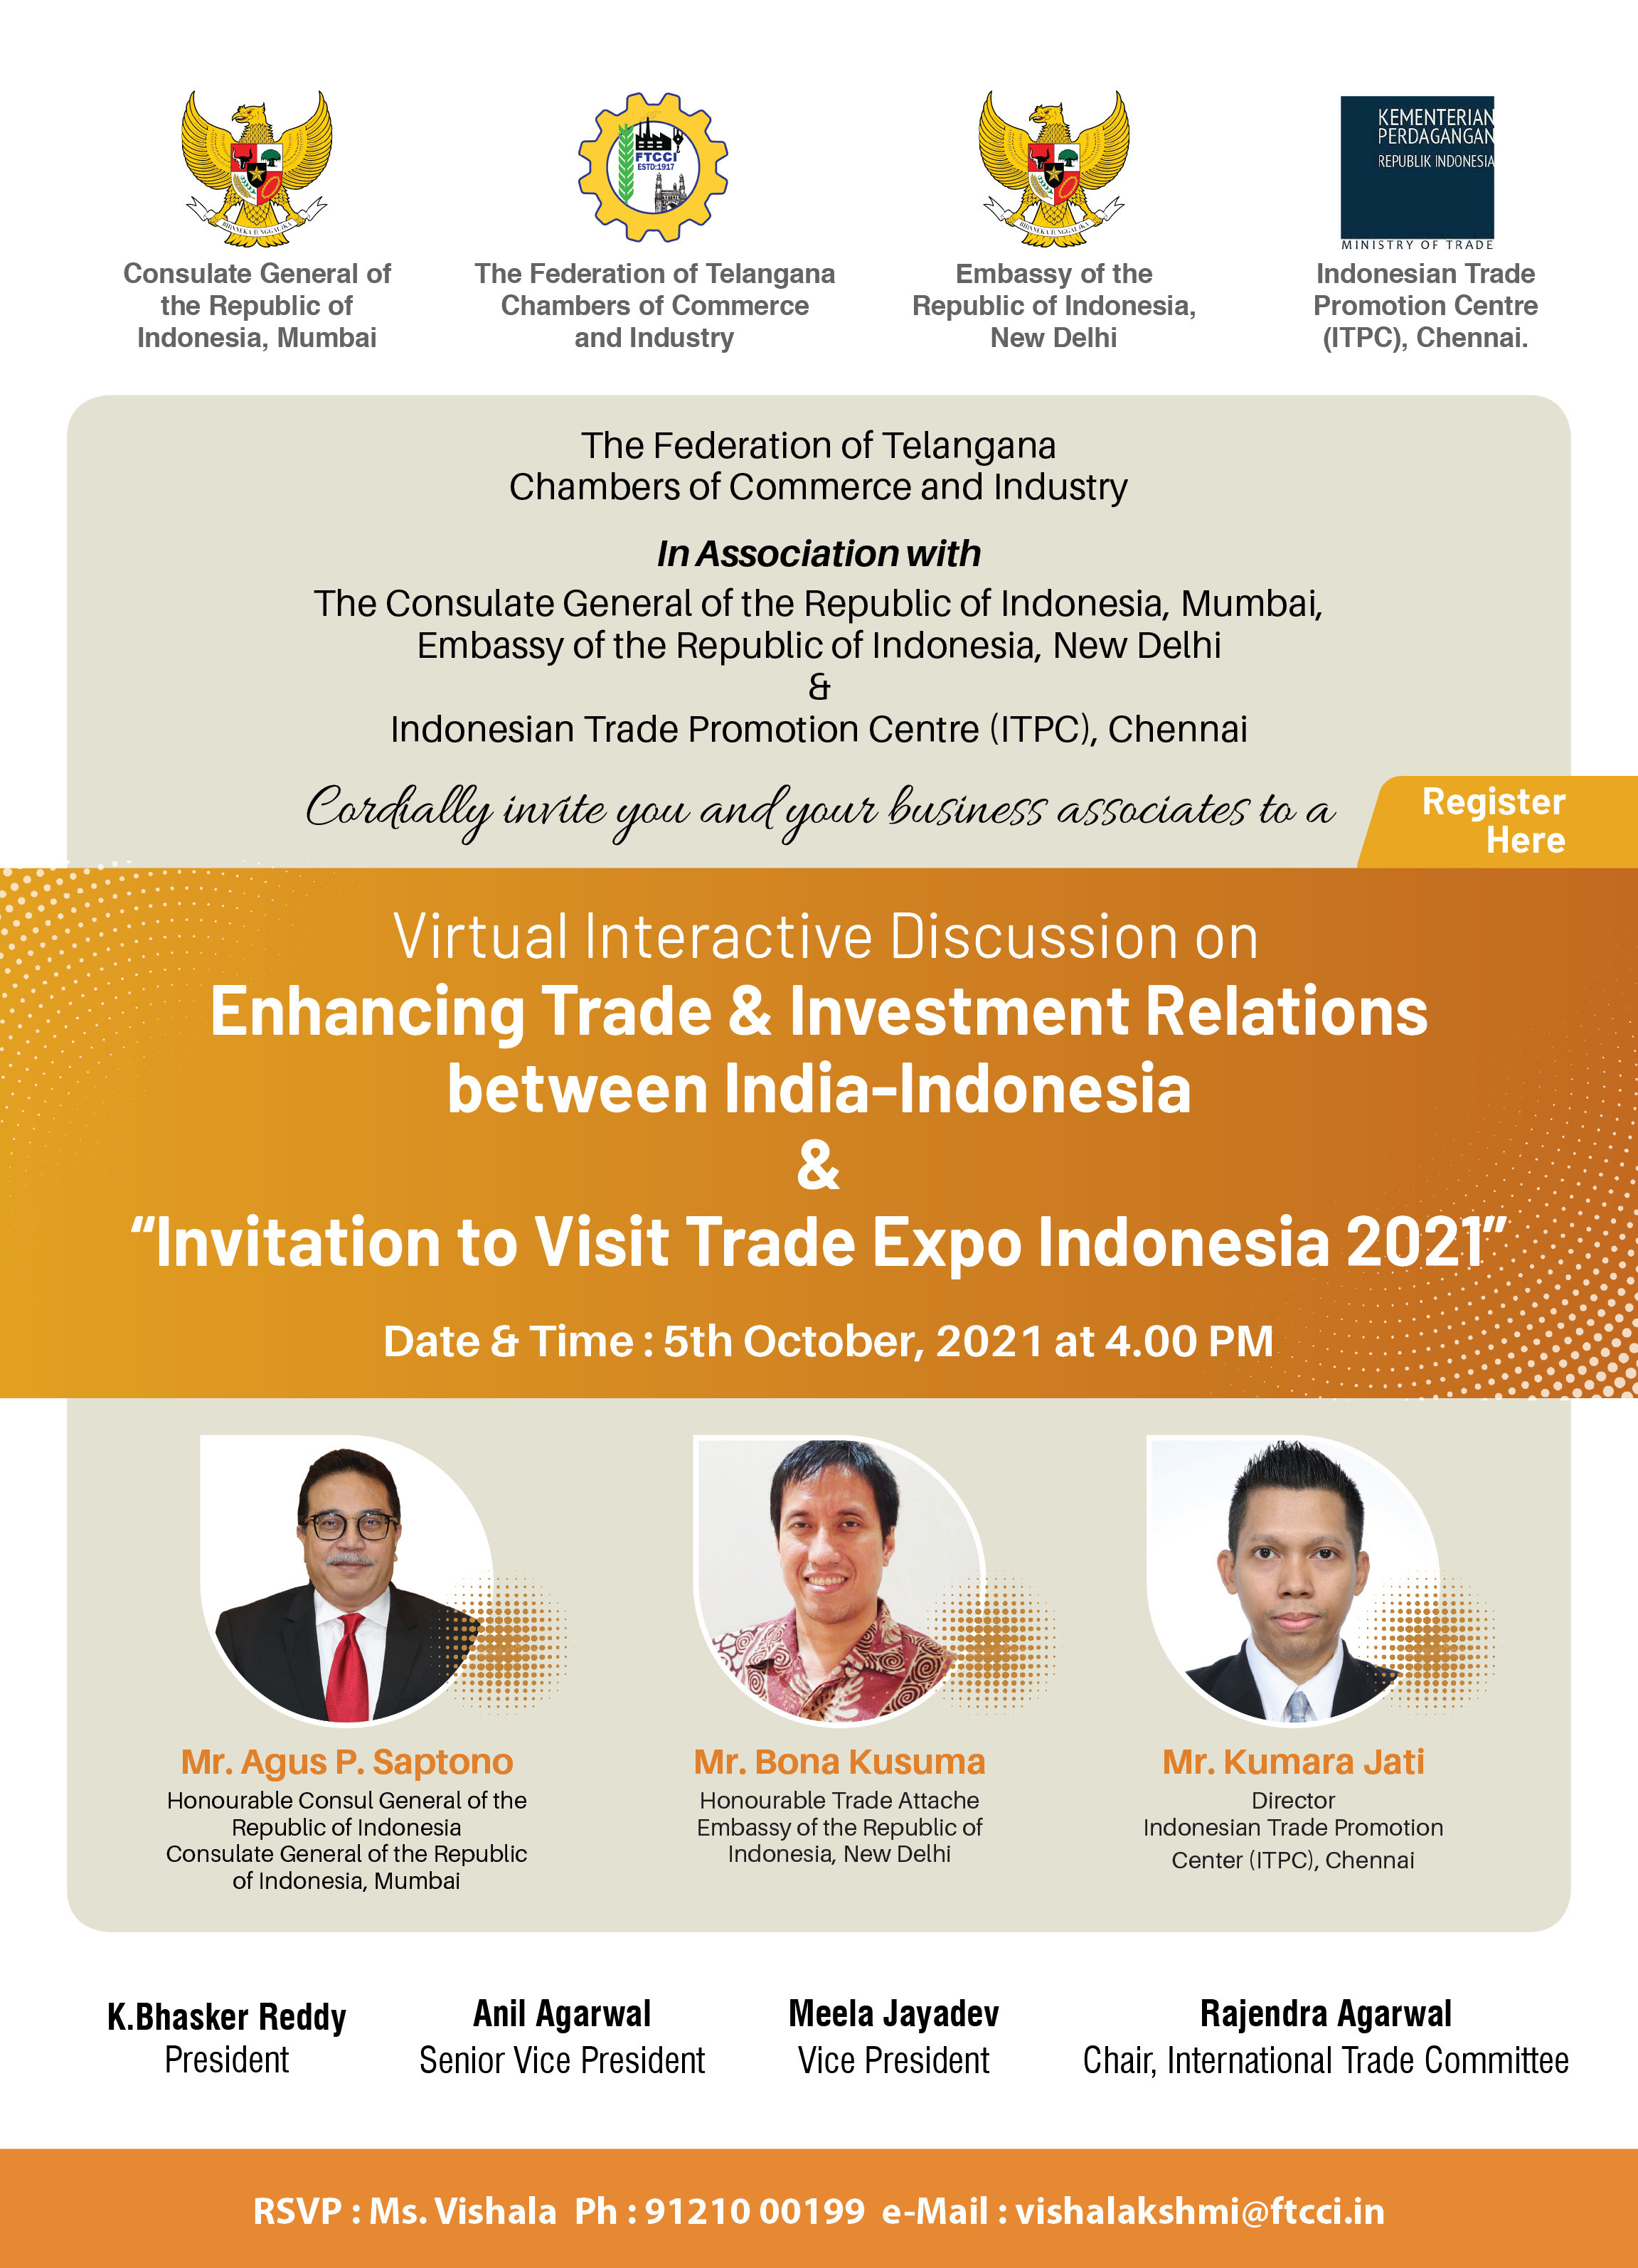 Virtual Interactive Discussion on Enhancing Trade & Investment Relations between India-Indonesia & “Invitation to Visit Trade Expo Indonesia 2021”